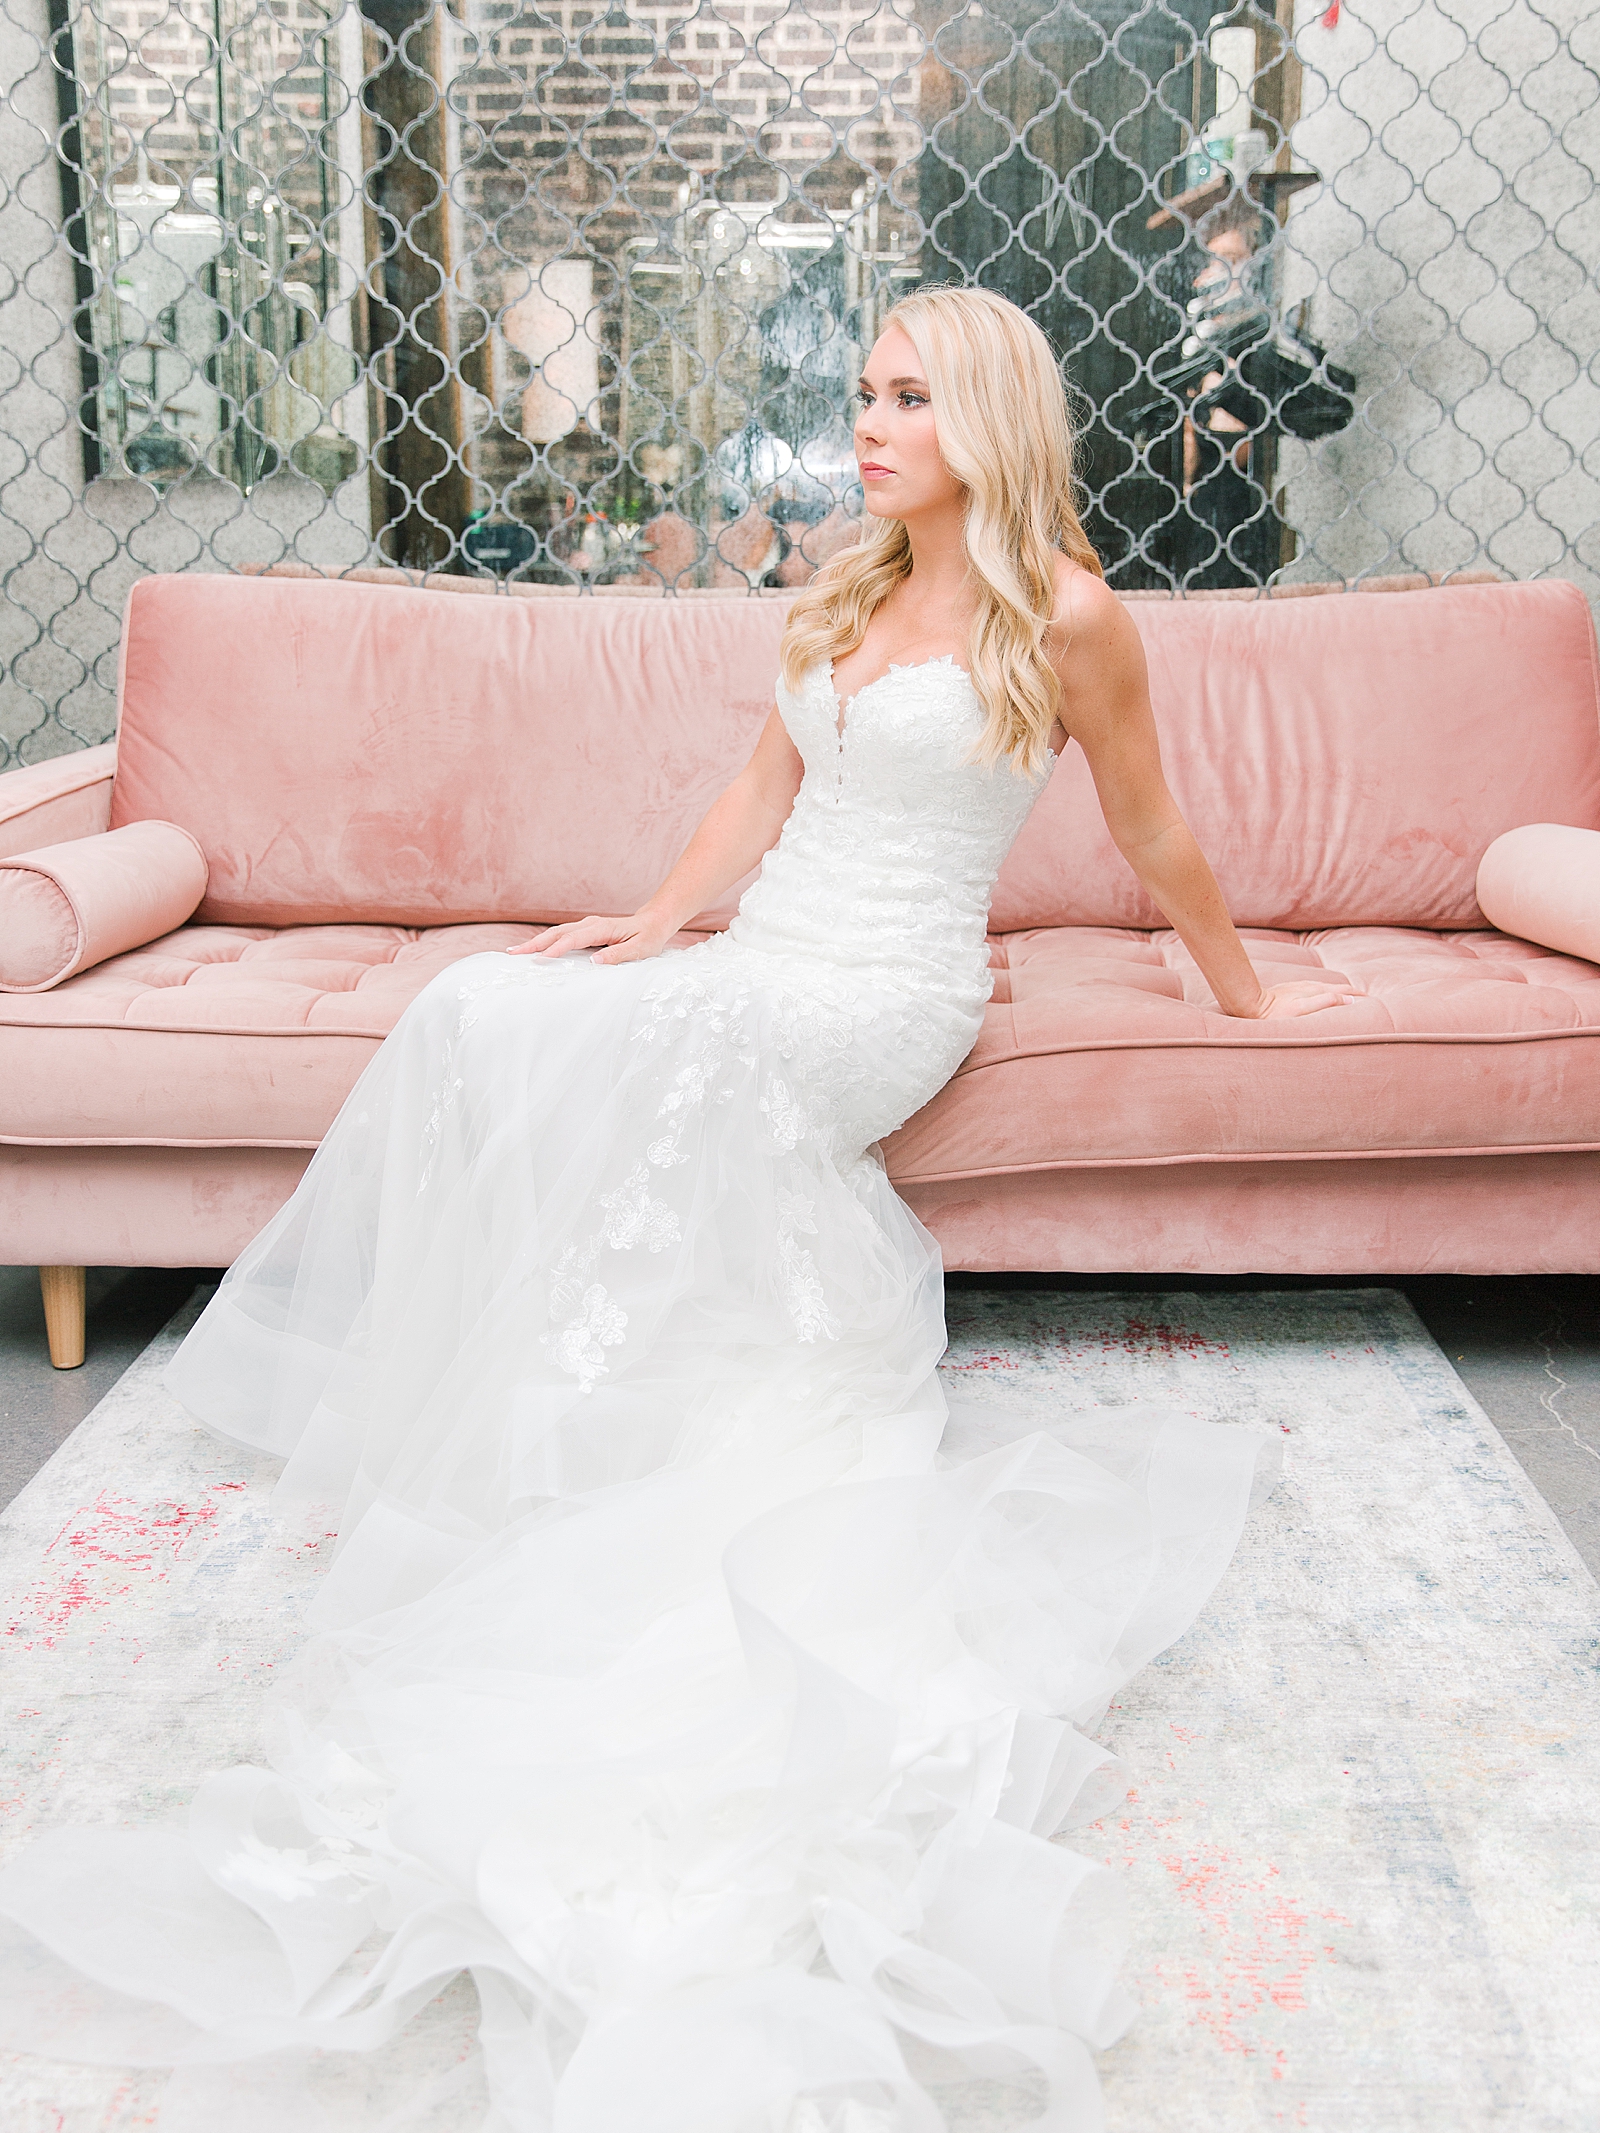 Glover Park Brewery Wedding Bride sitting on pink couch in bridal suite Photo